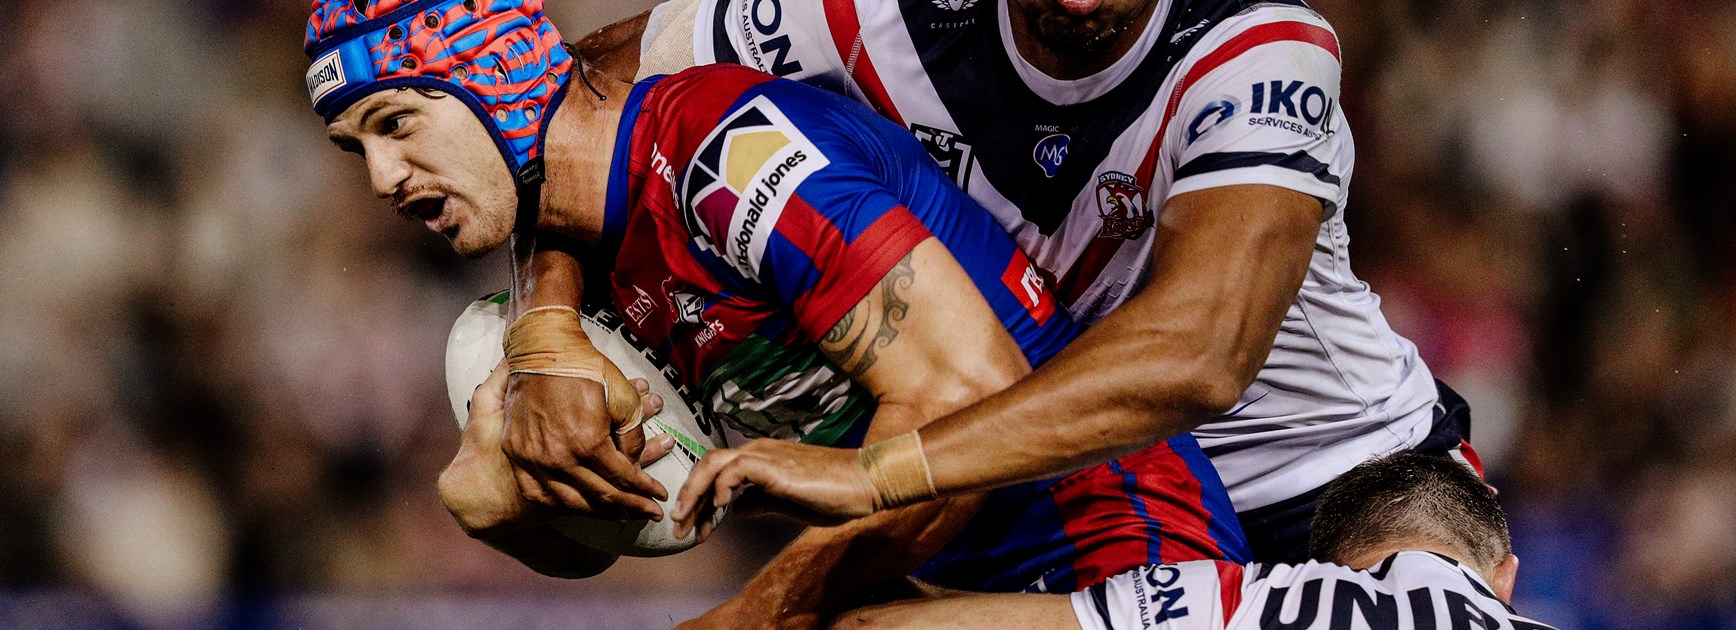 Newcastle handed heavy defeat at the hands of the Roosters